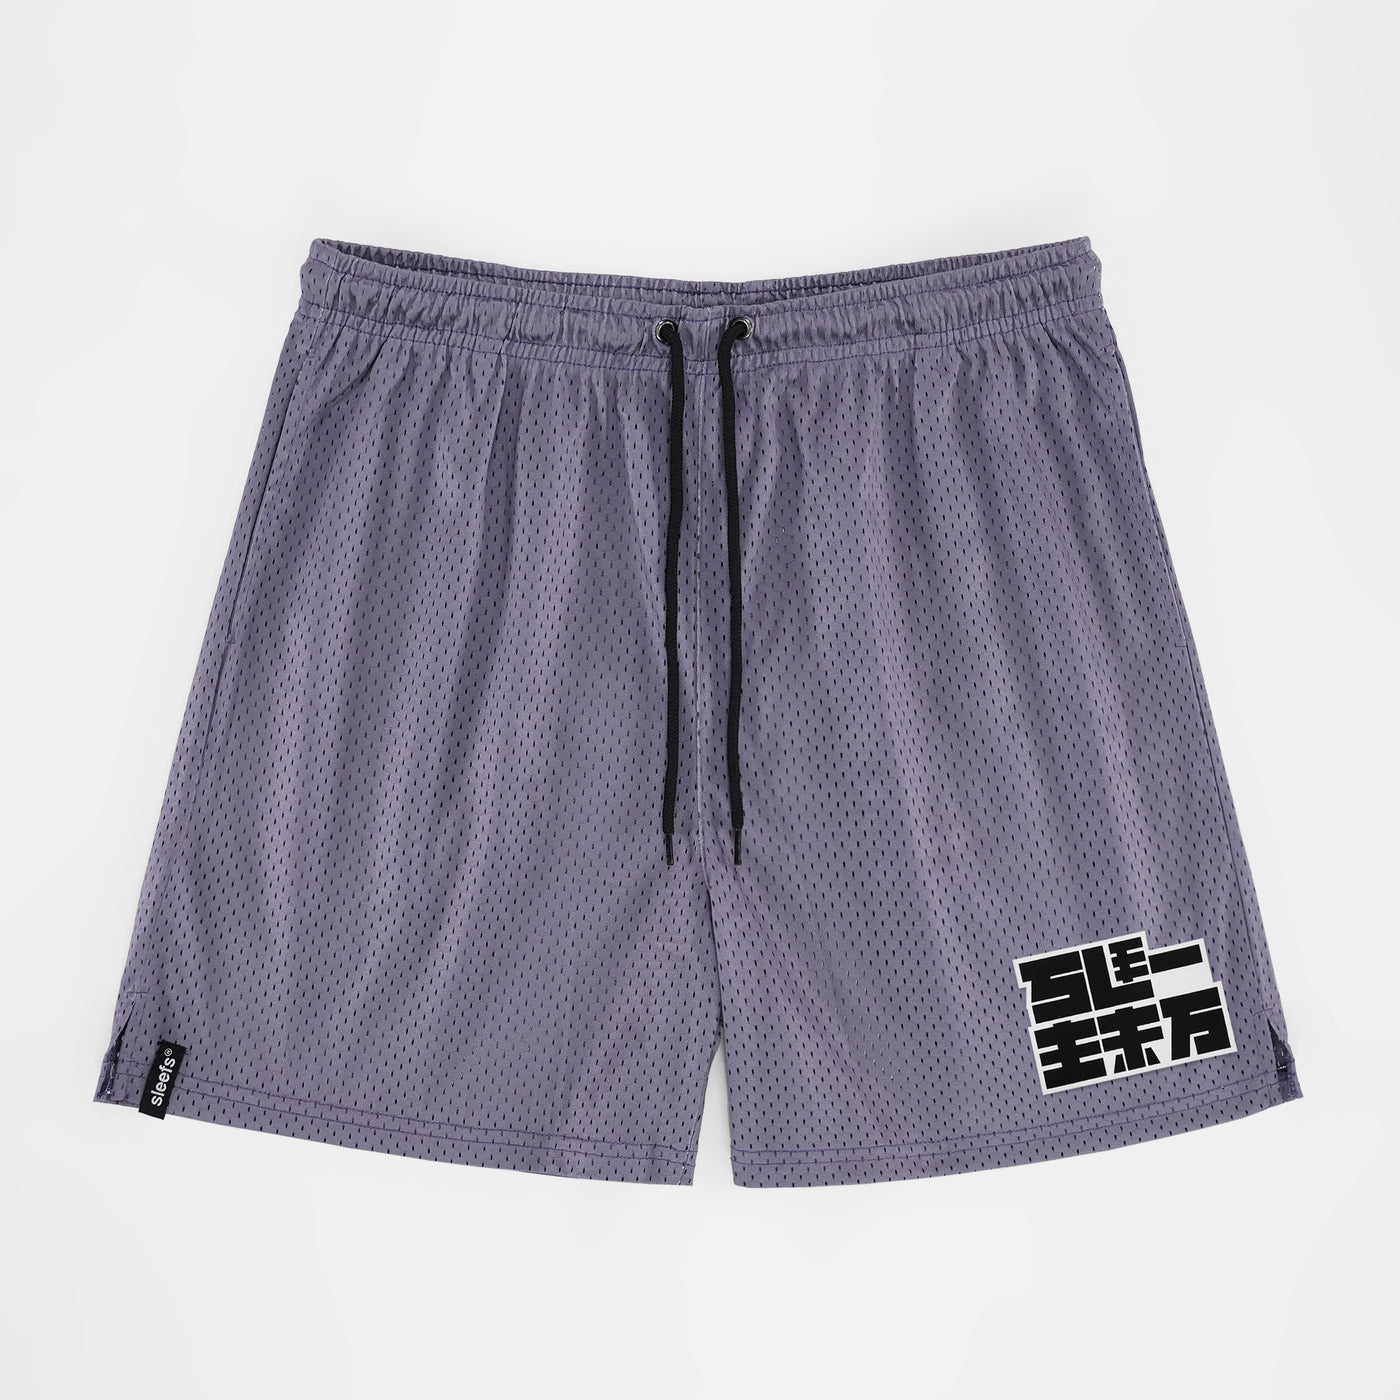 Sleefs Asia Patch Shorts - 7"